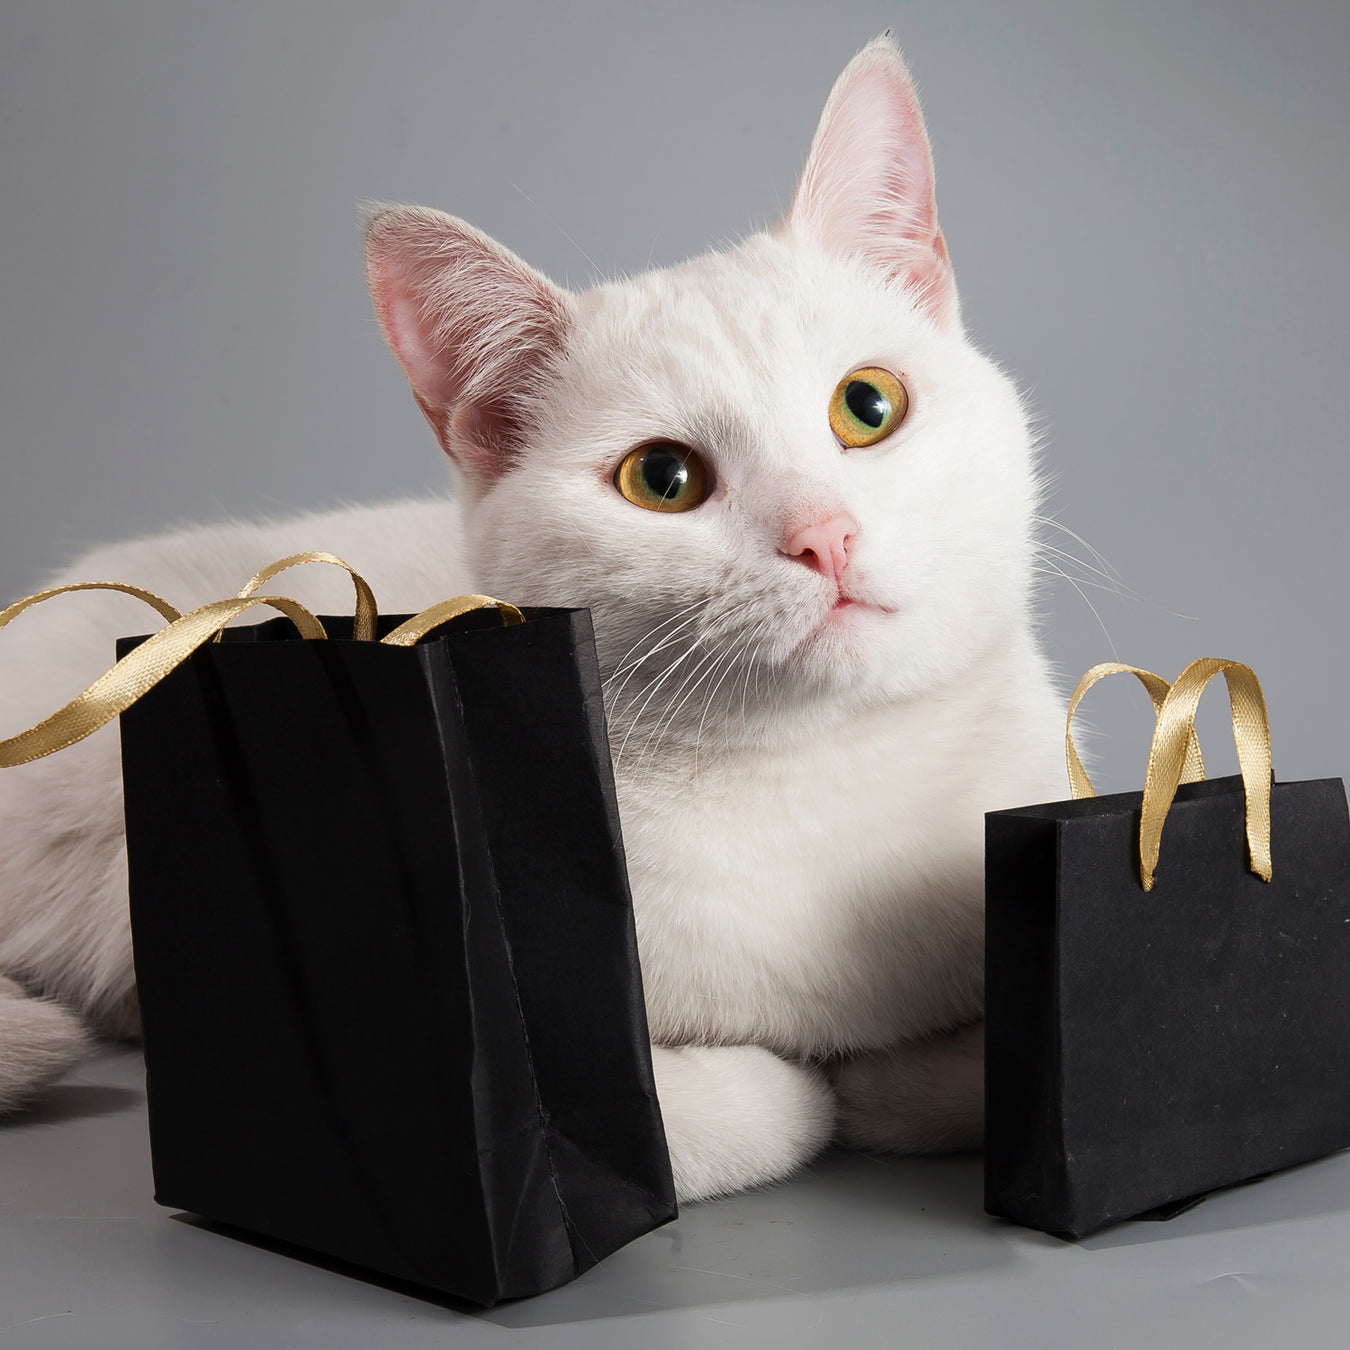 Best Selling Cat Gifts